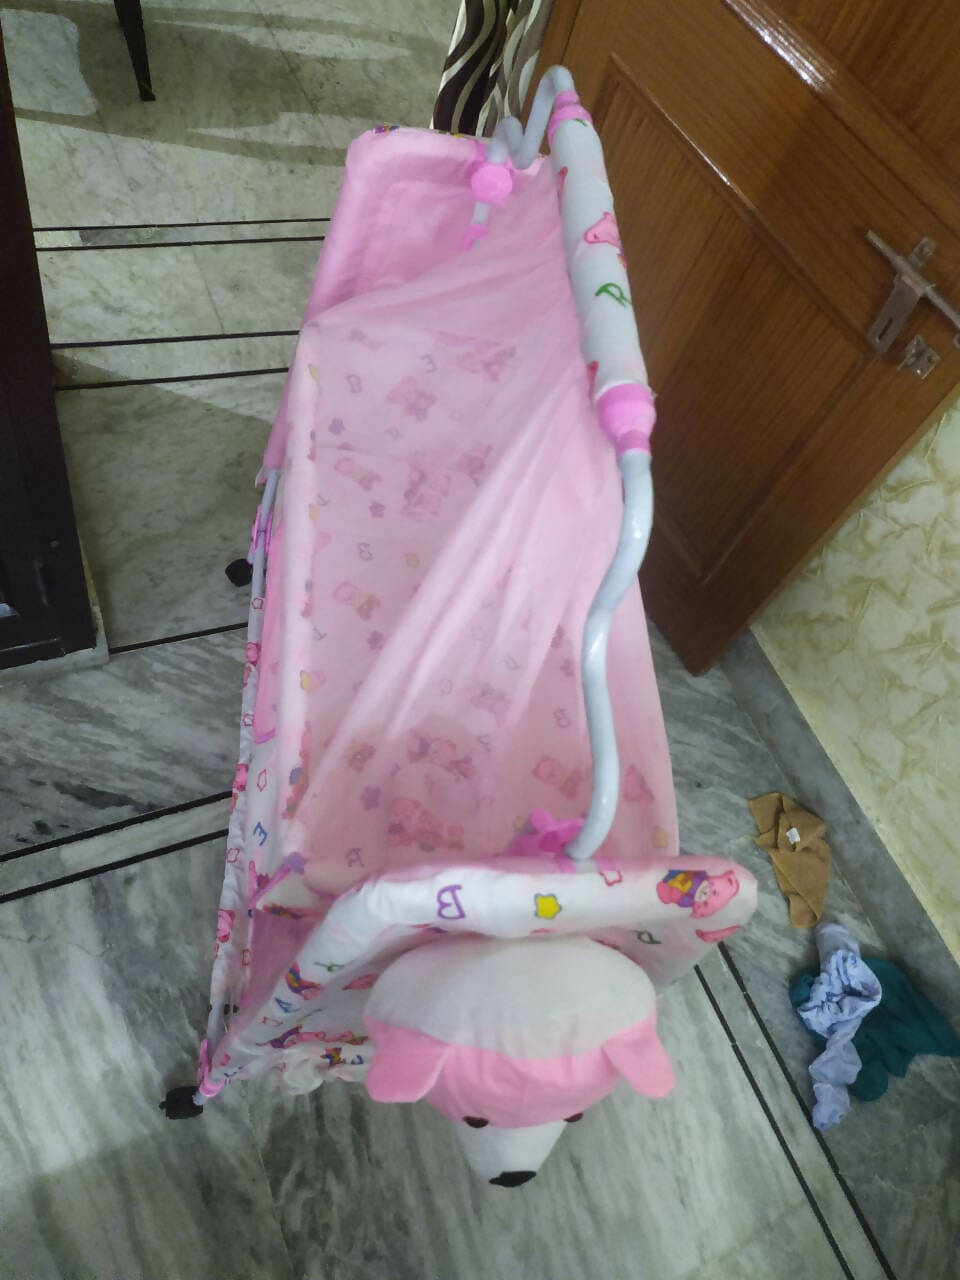 FUNBABY Cradle for Baby- Pink